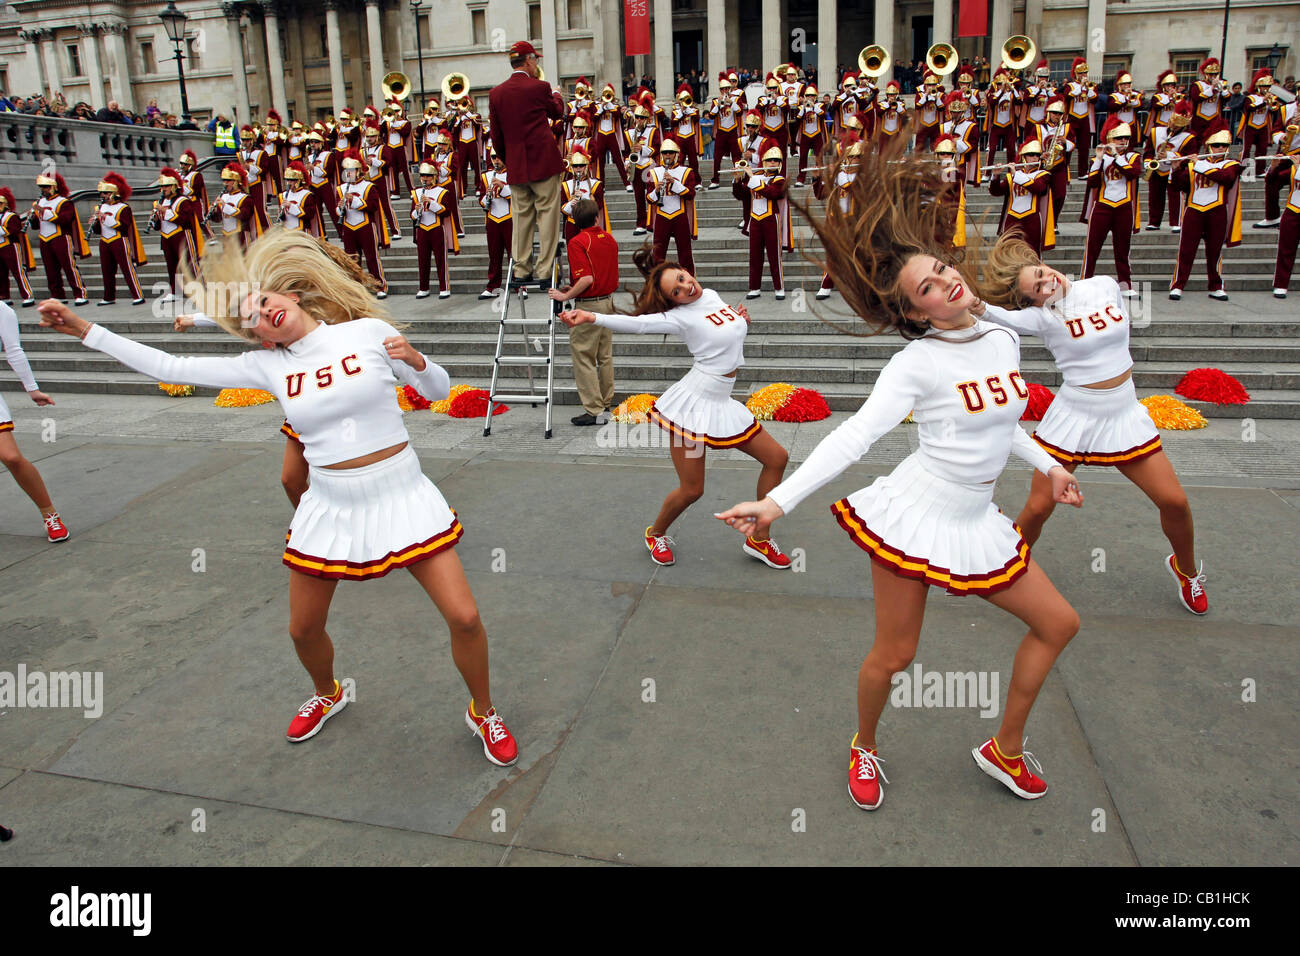 London, UK. Sunday 20th May 2012. USC Marching Trojans from the University of Southern California in Trafalgar Square, London. Stock Photo